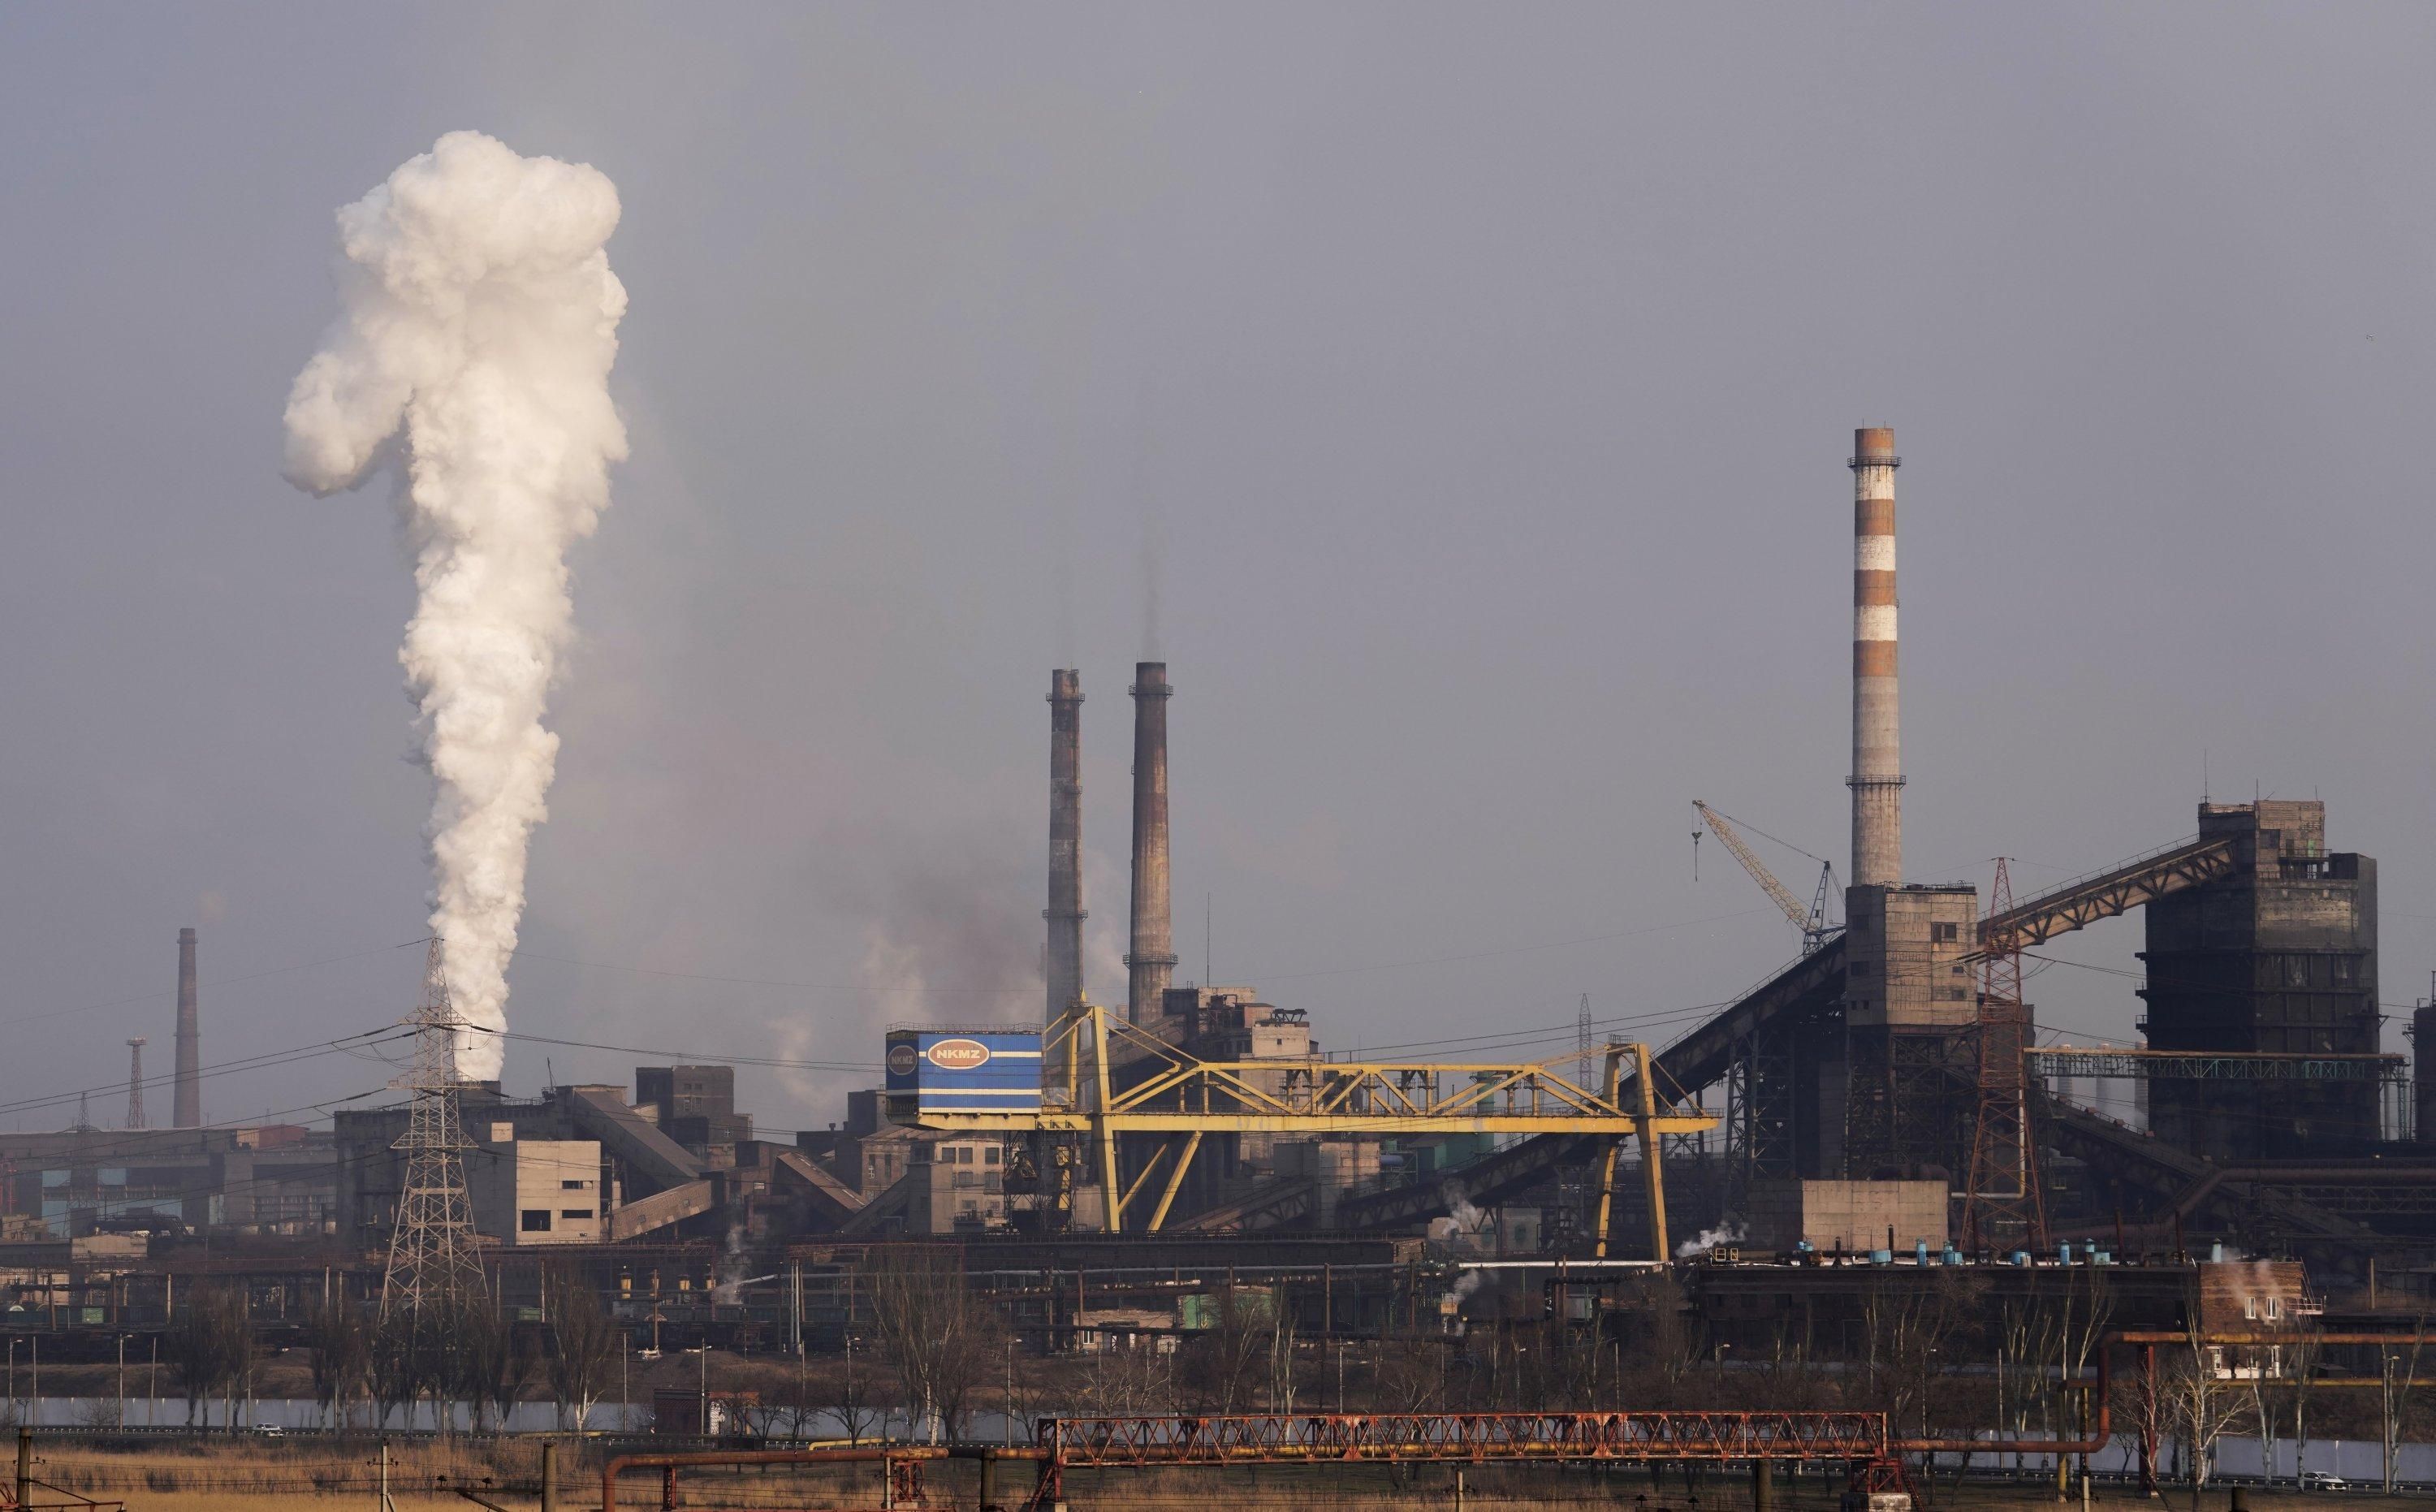 Intense attacks continued on the besieged Azovstal steel plant - en